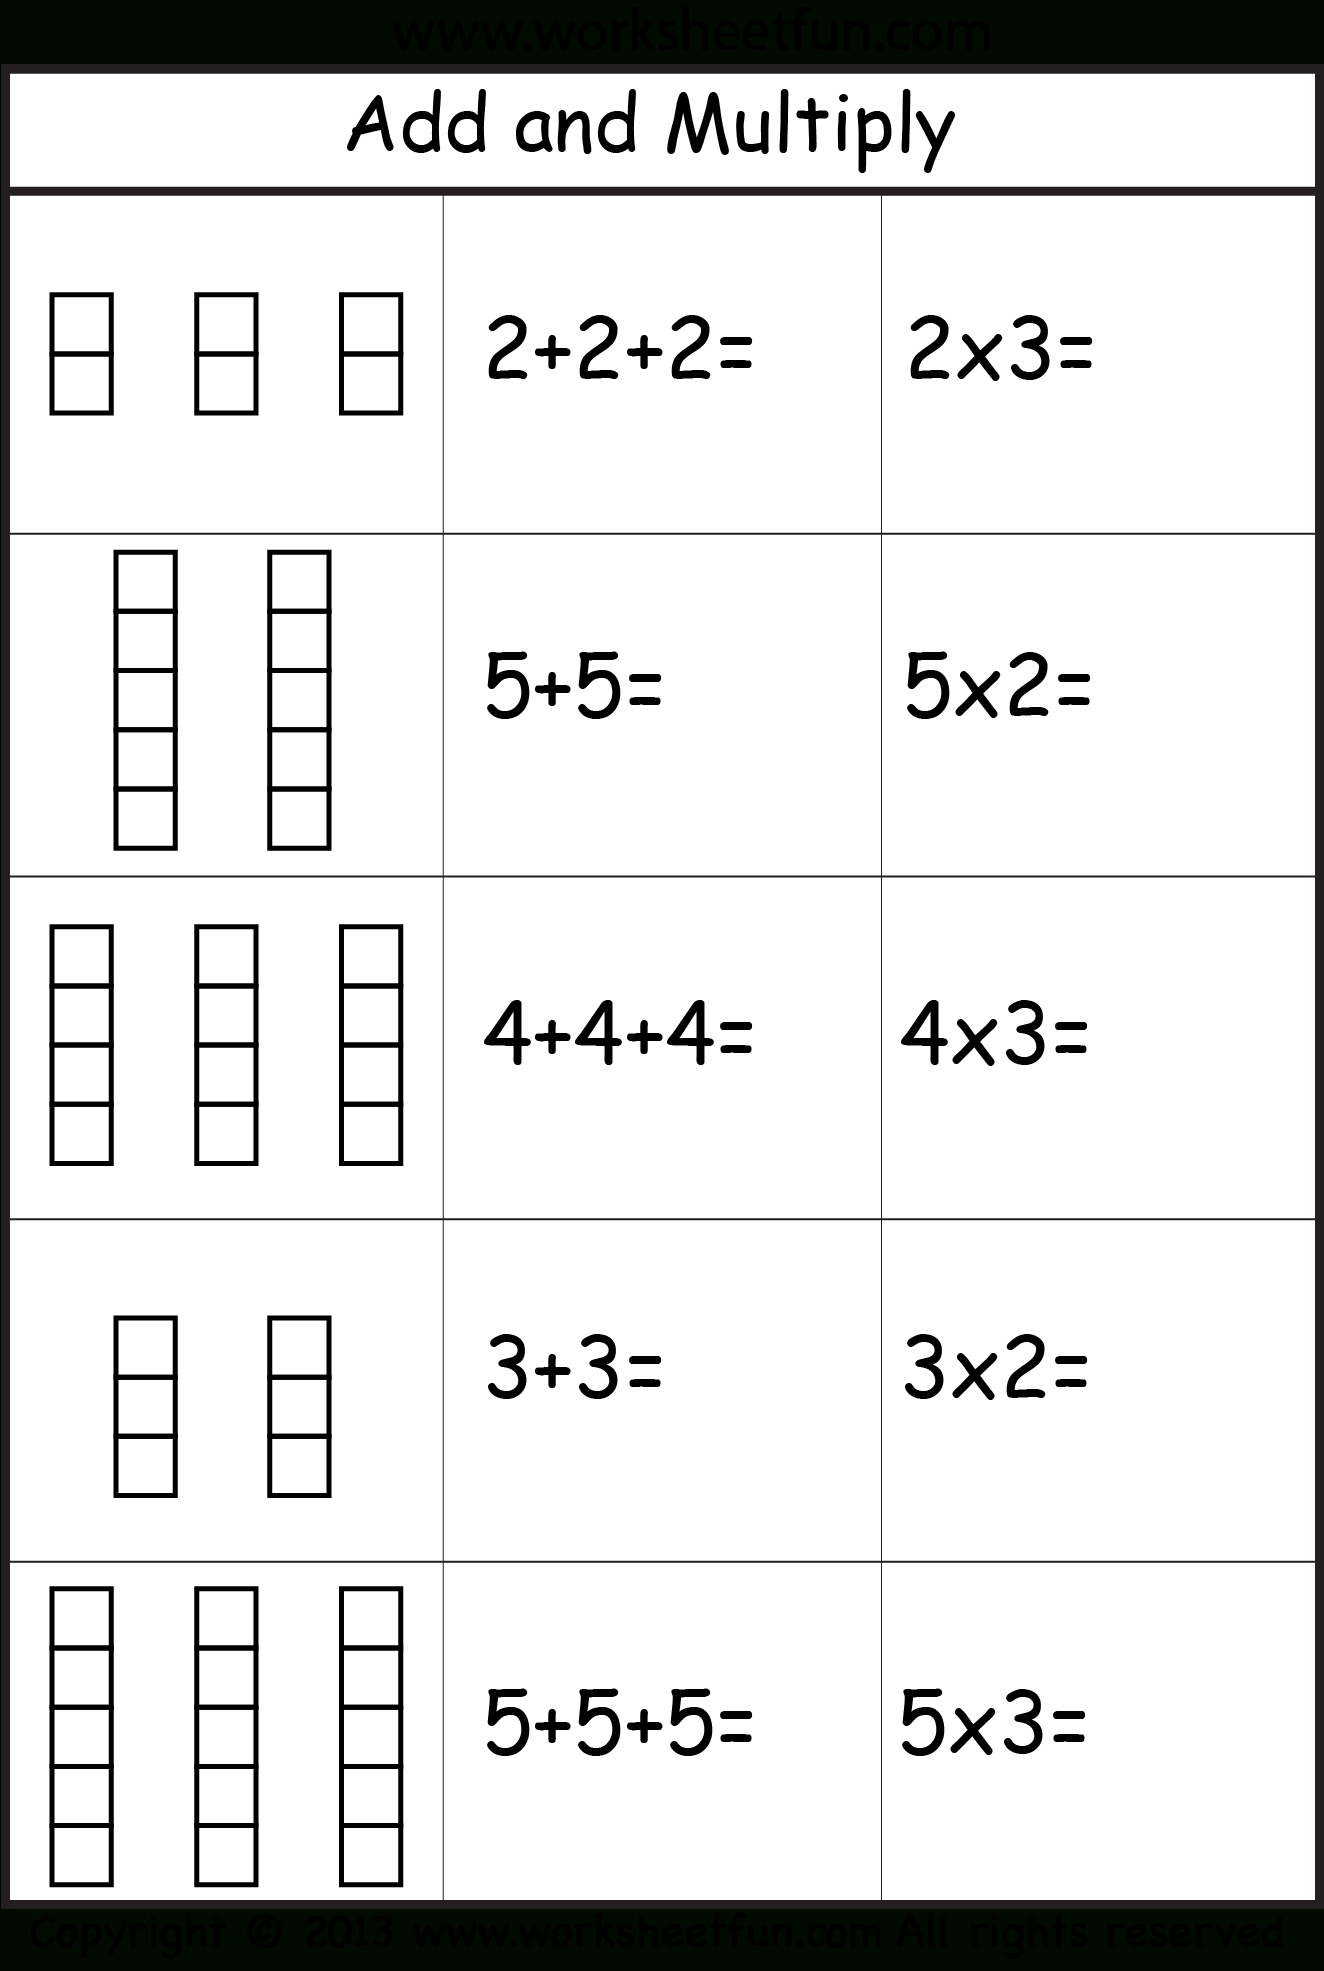 Repeated Addition | Repeated Addition, Math Worksheets intended for Multiplication Worksheets Repeated Addition